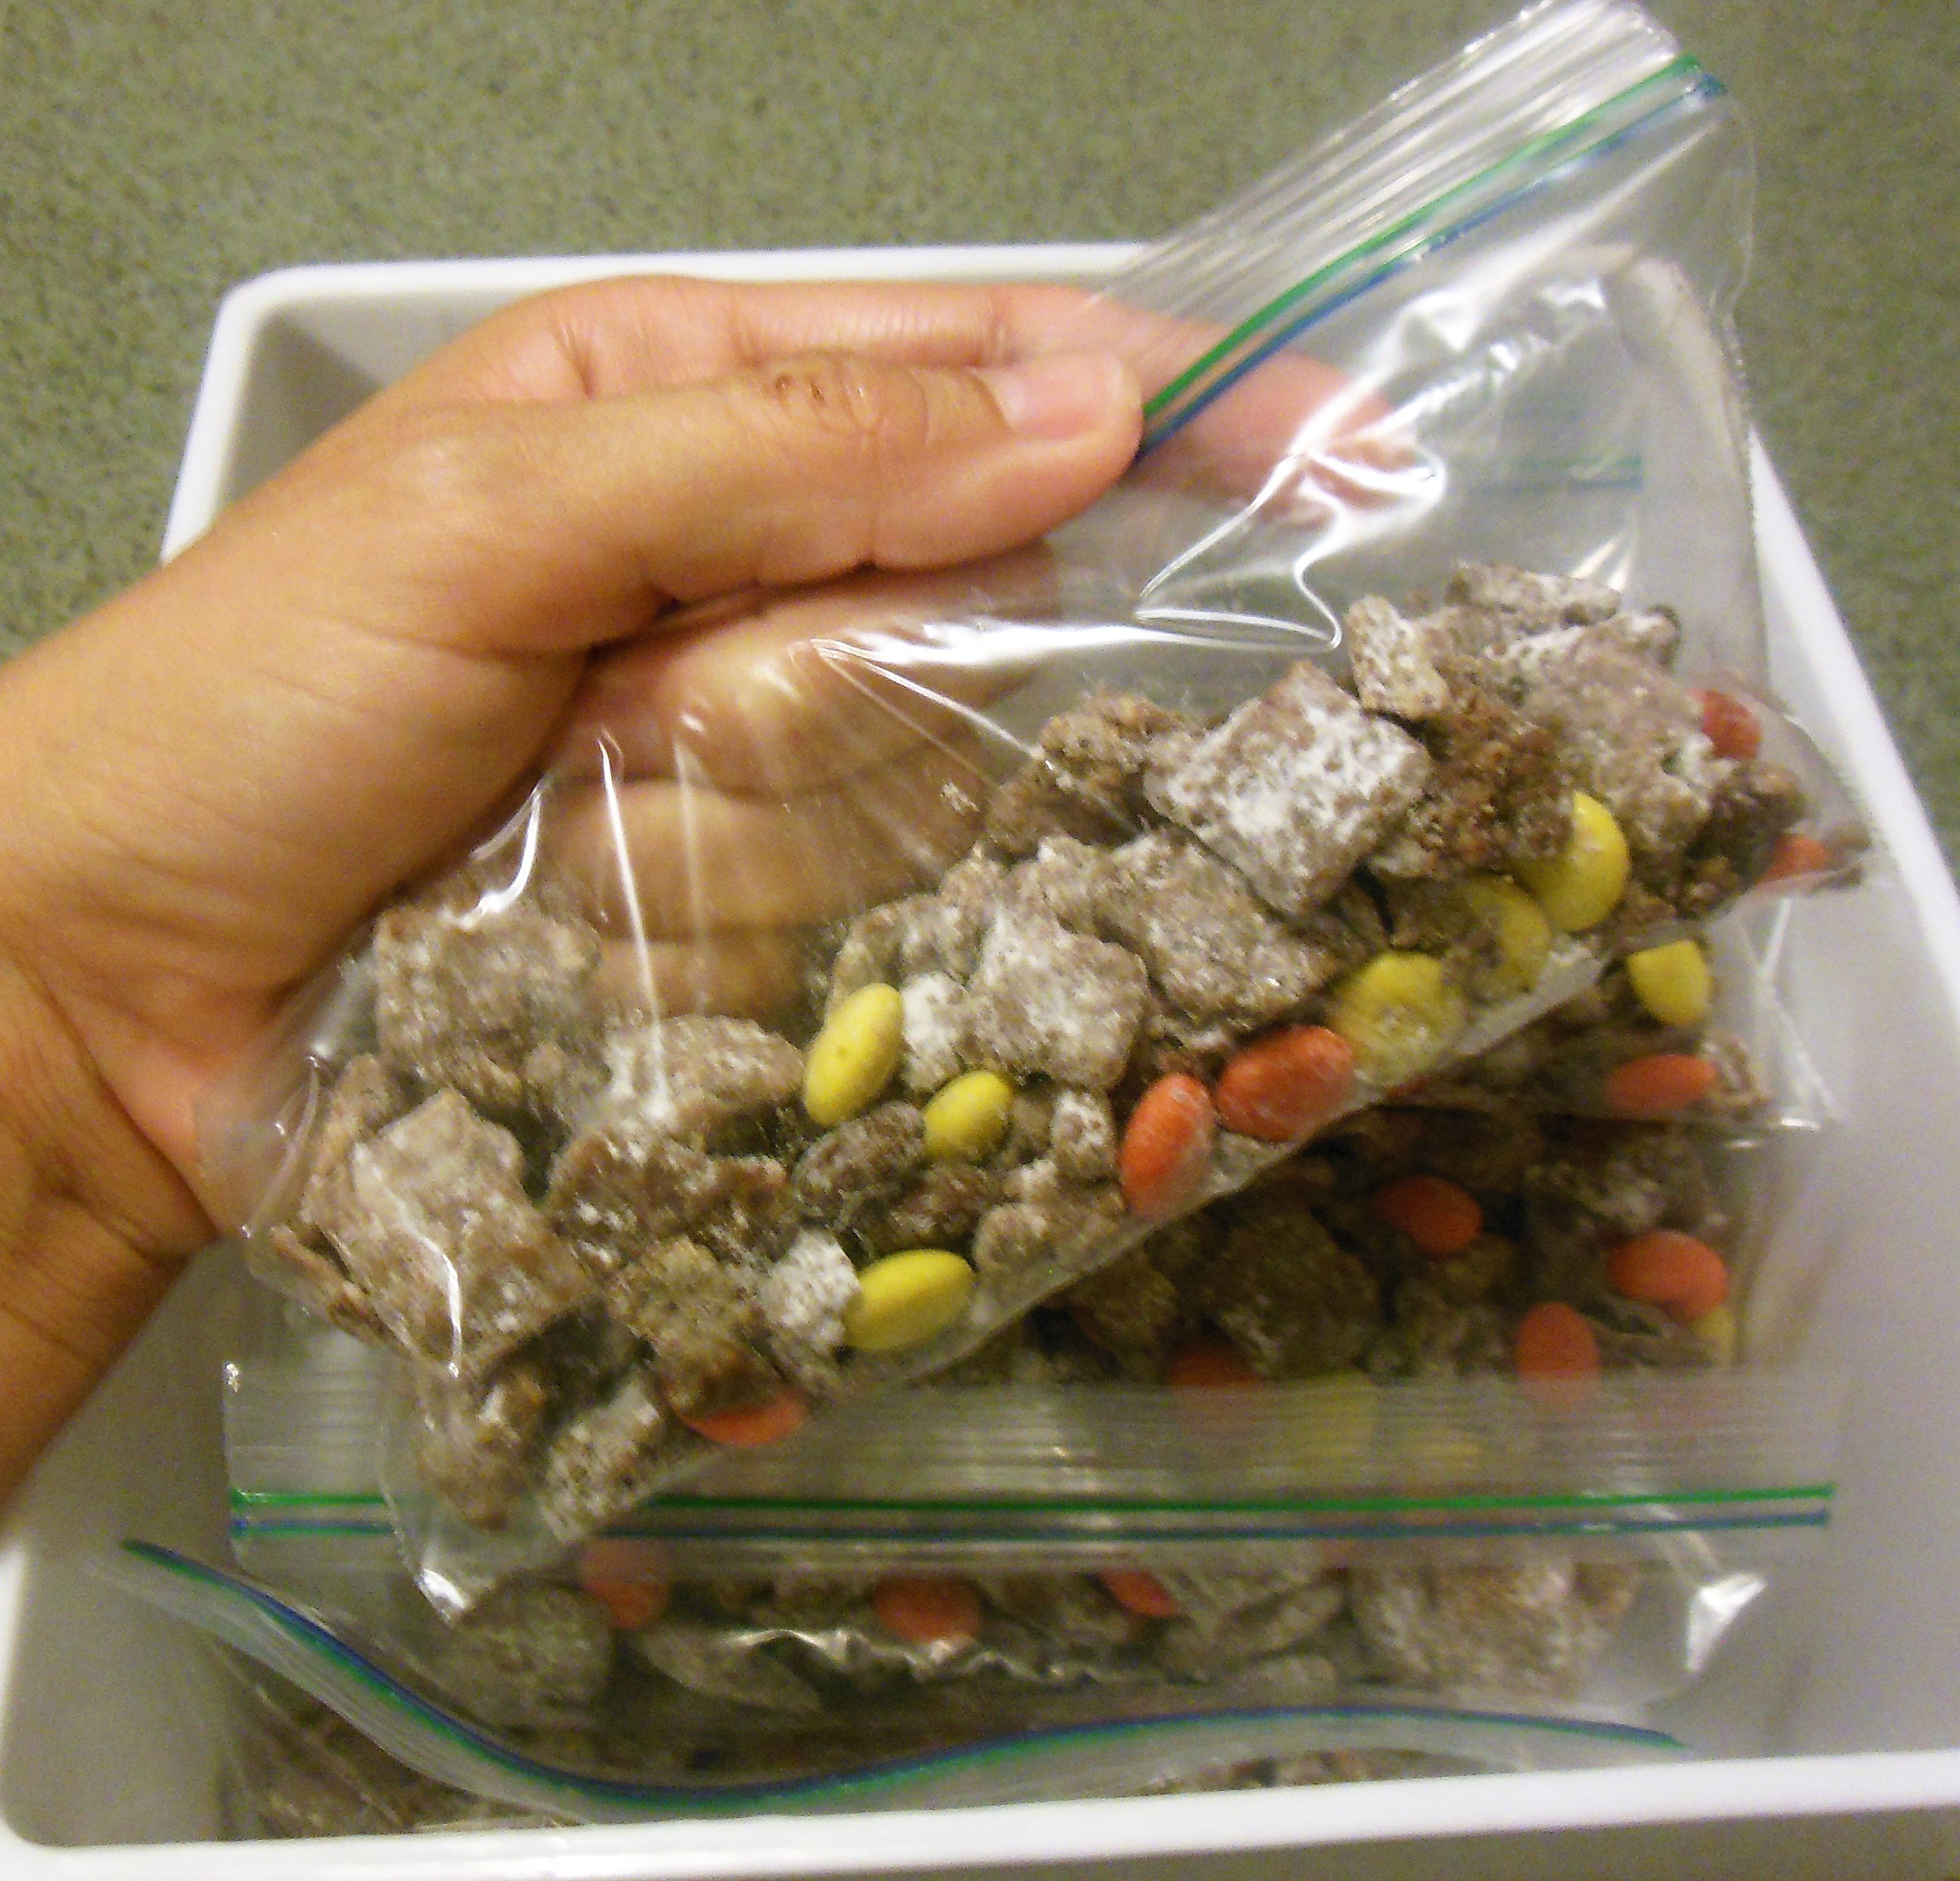 Puppy Chow - If you have kids involved with athletics, chances are you'll eventually take a turn (or a dozen turns) at team snack duty. With four kids, all in a sport or multiple sports during every season, I've definitely had some experience in providing team snacks. Let's face it, I practically have a Ph.D. in feeding teams of children at his point. When it's my turn to bring the team snack, I try not to bring something that's prepackaged and highly processed. Prepackaged snacks are often expensive and usually packed full of chemicals and preservatives we can't even pronounce. You can provide a fun and tasty team snack that didn't come from a box. These team snacks are a huge hit for fall sports! 